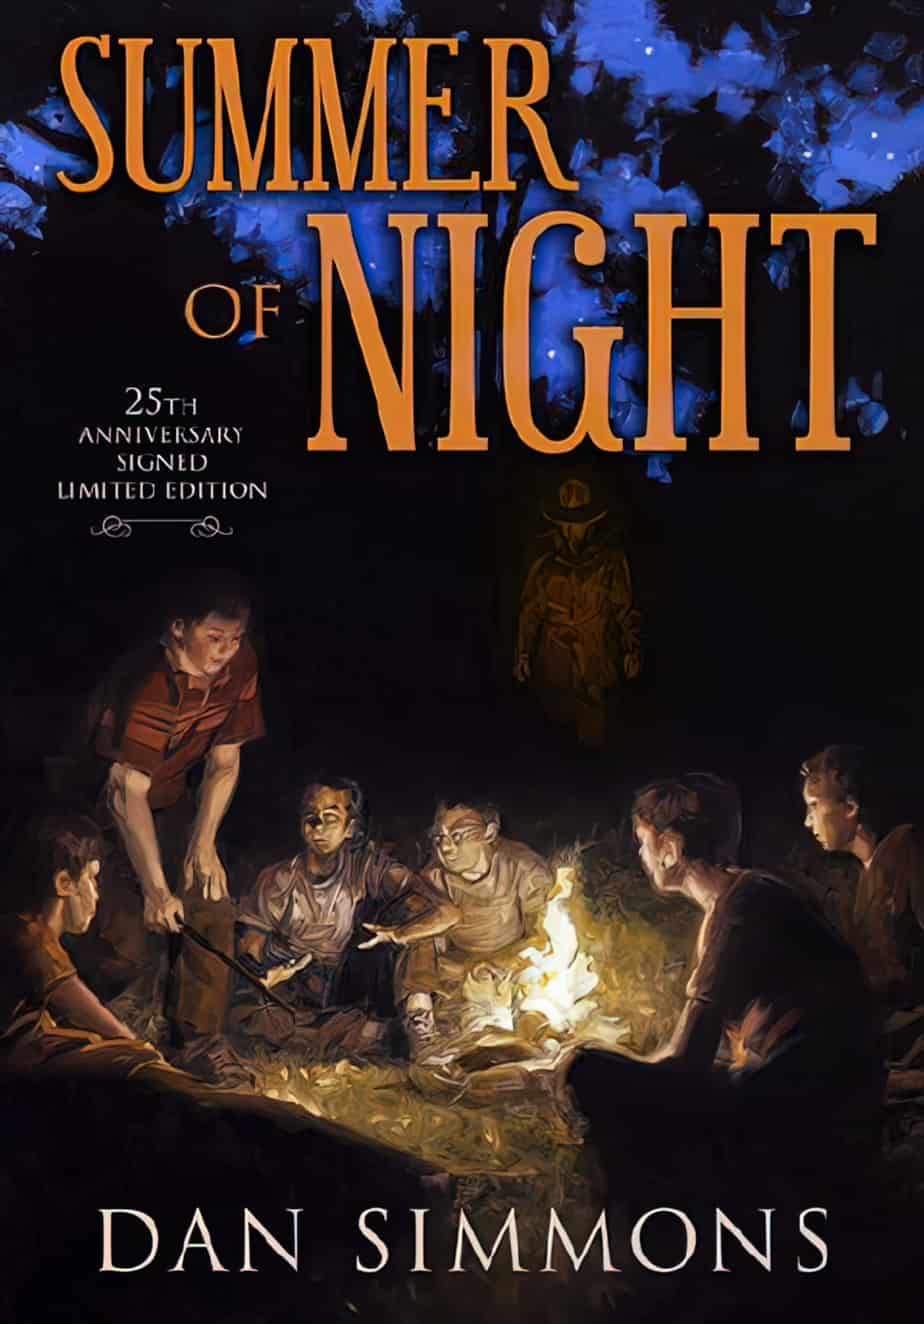 Summer of Night by Dan Simmons campfire